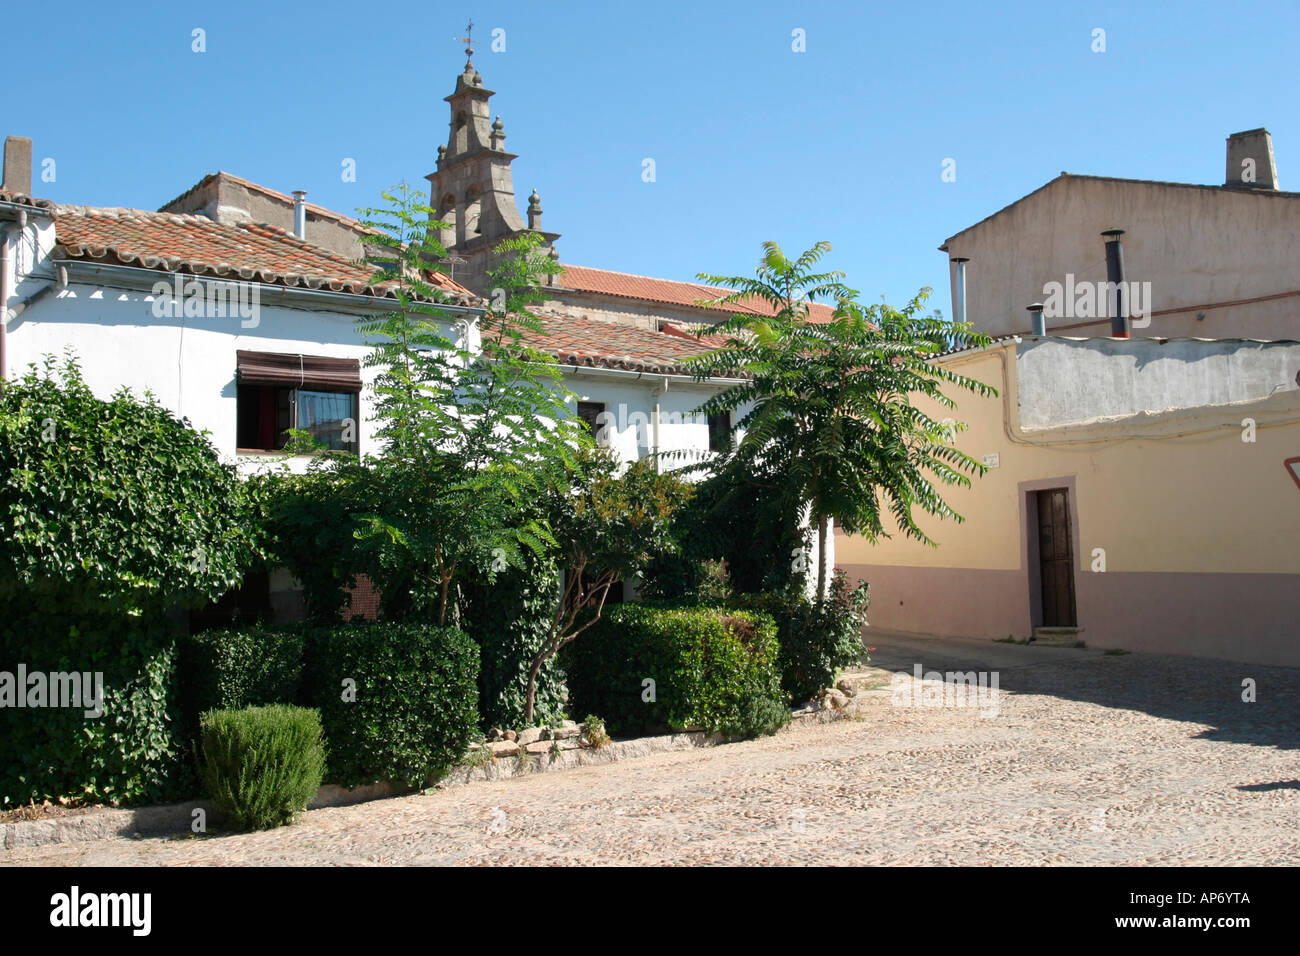 Small town of Ledesma, Western Spain Stock Photo